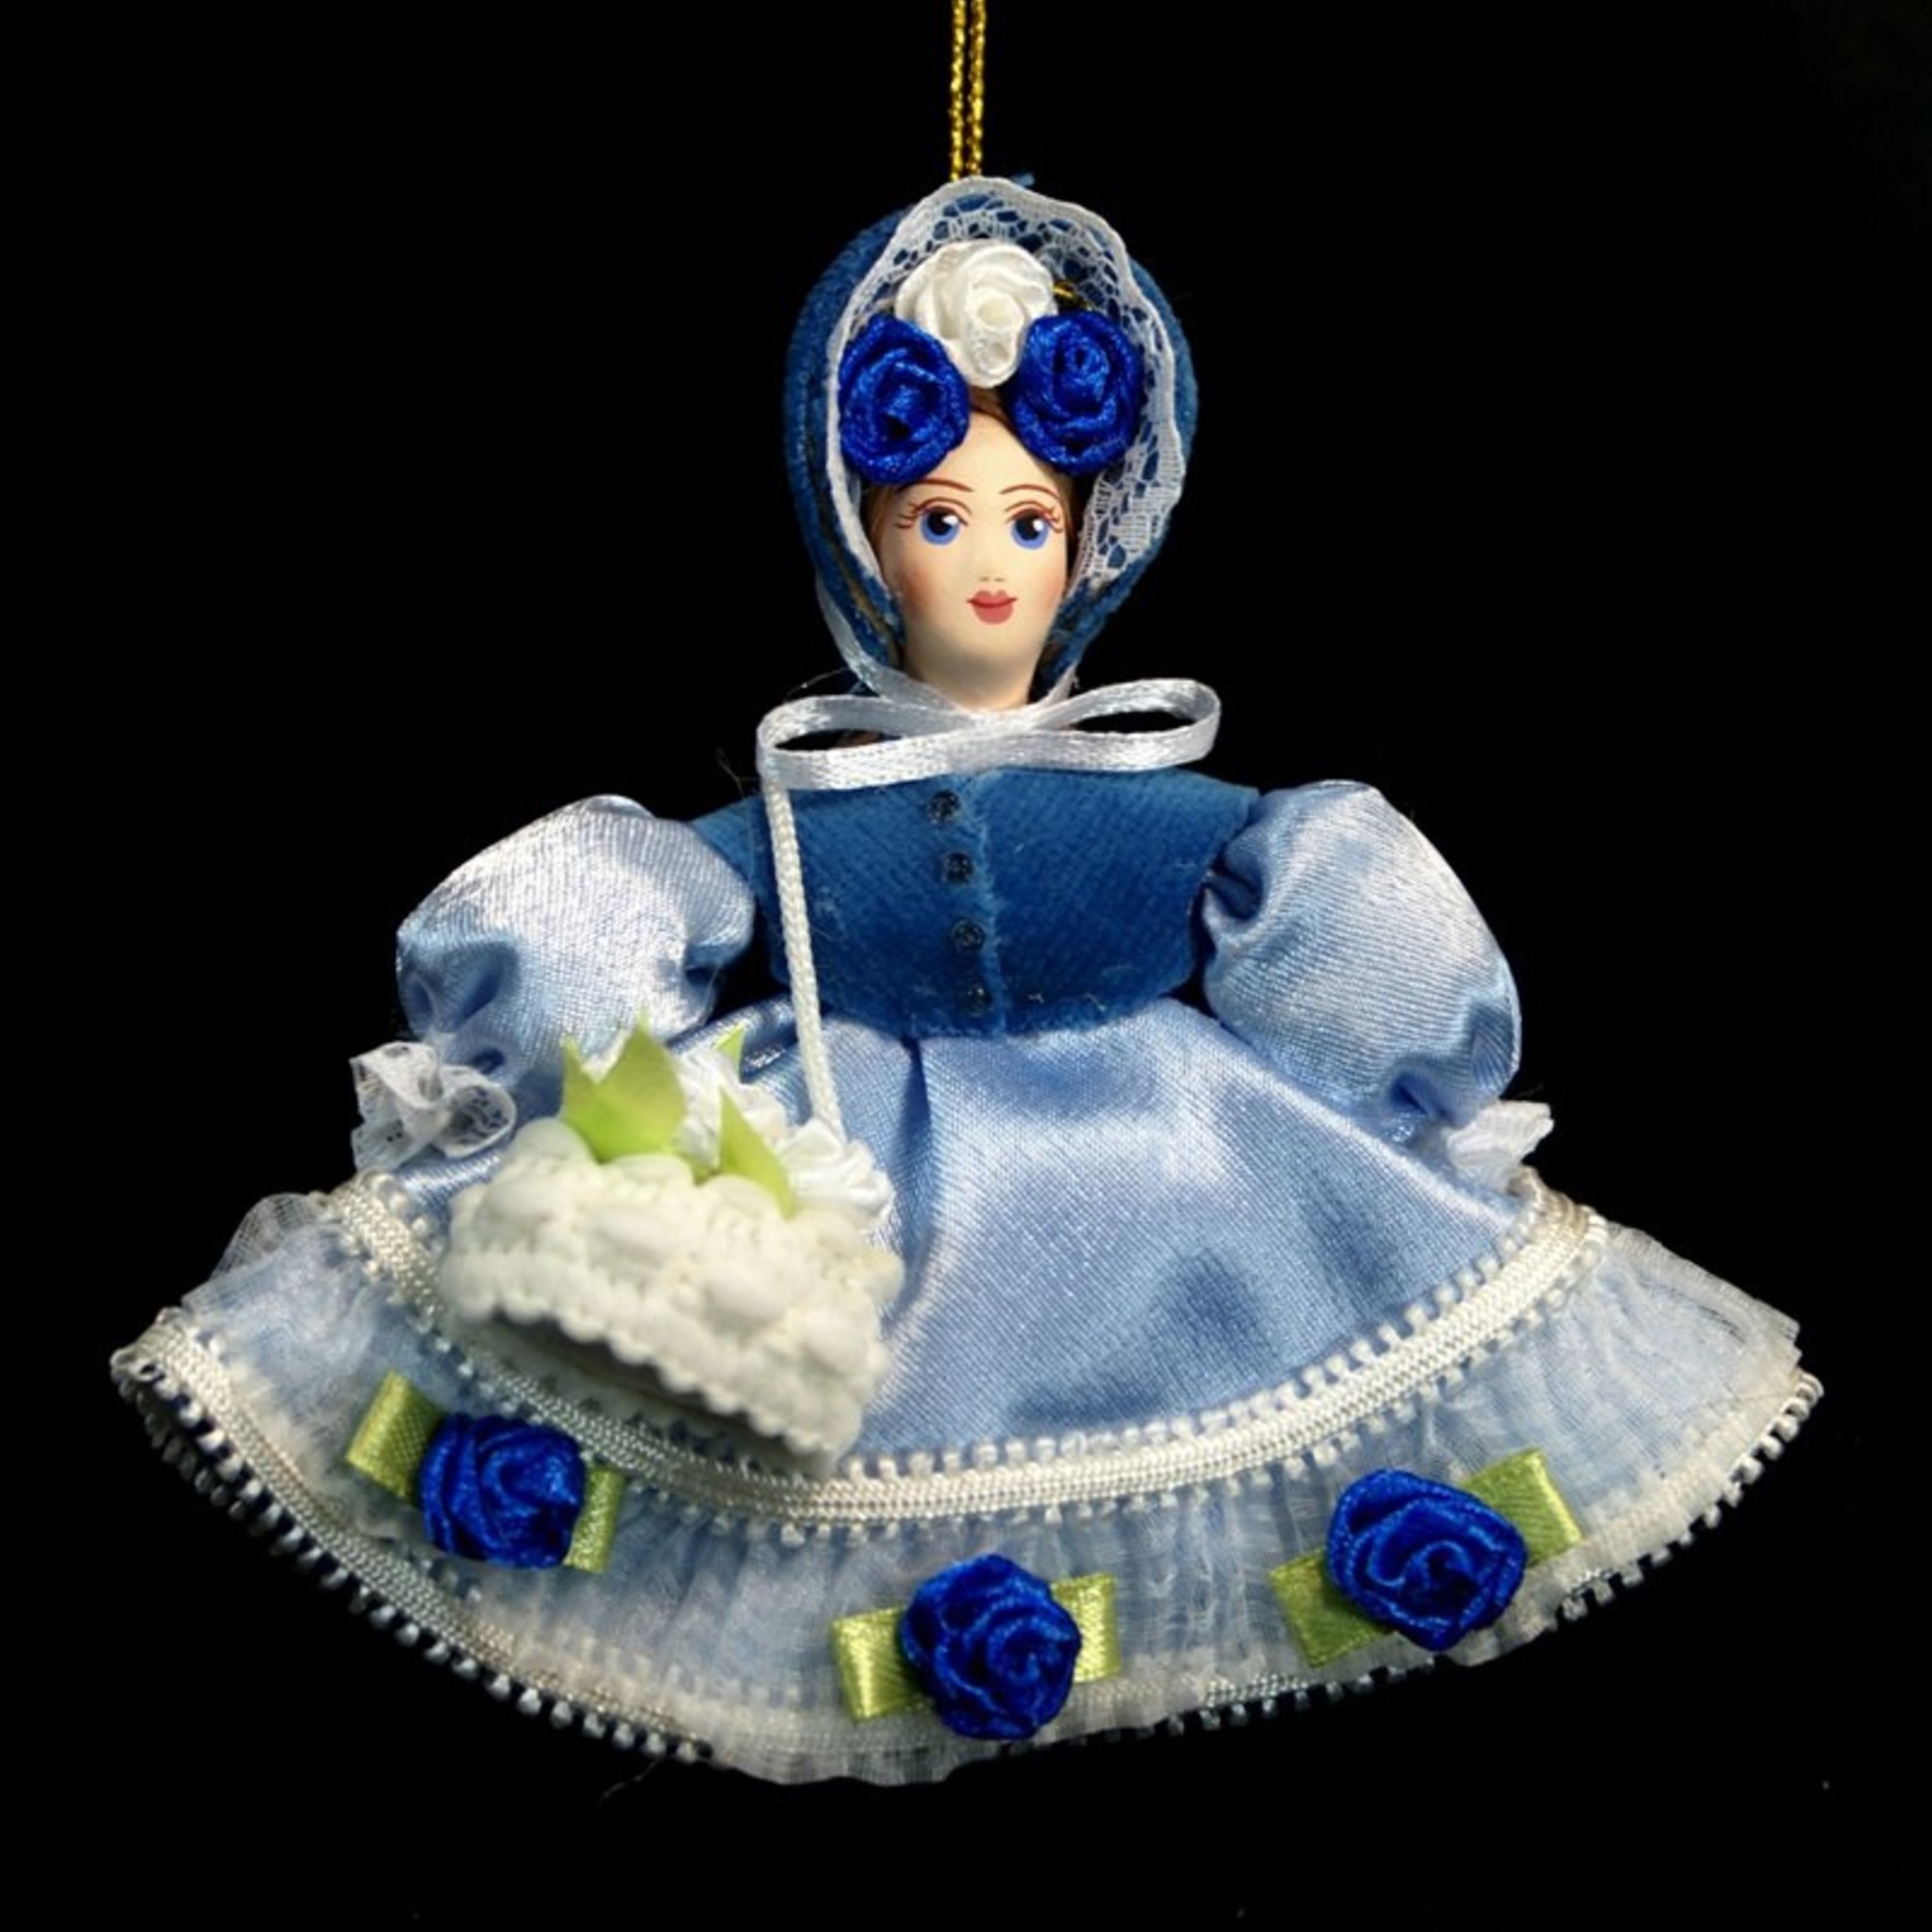 Master-class on making of souvenir porcelain doll